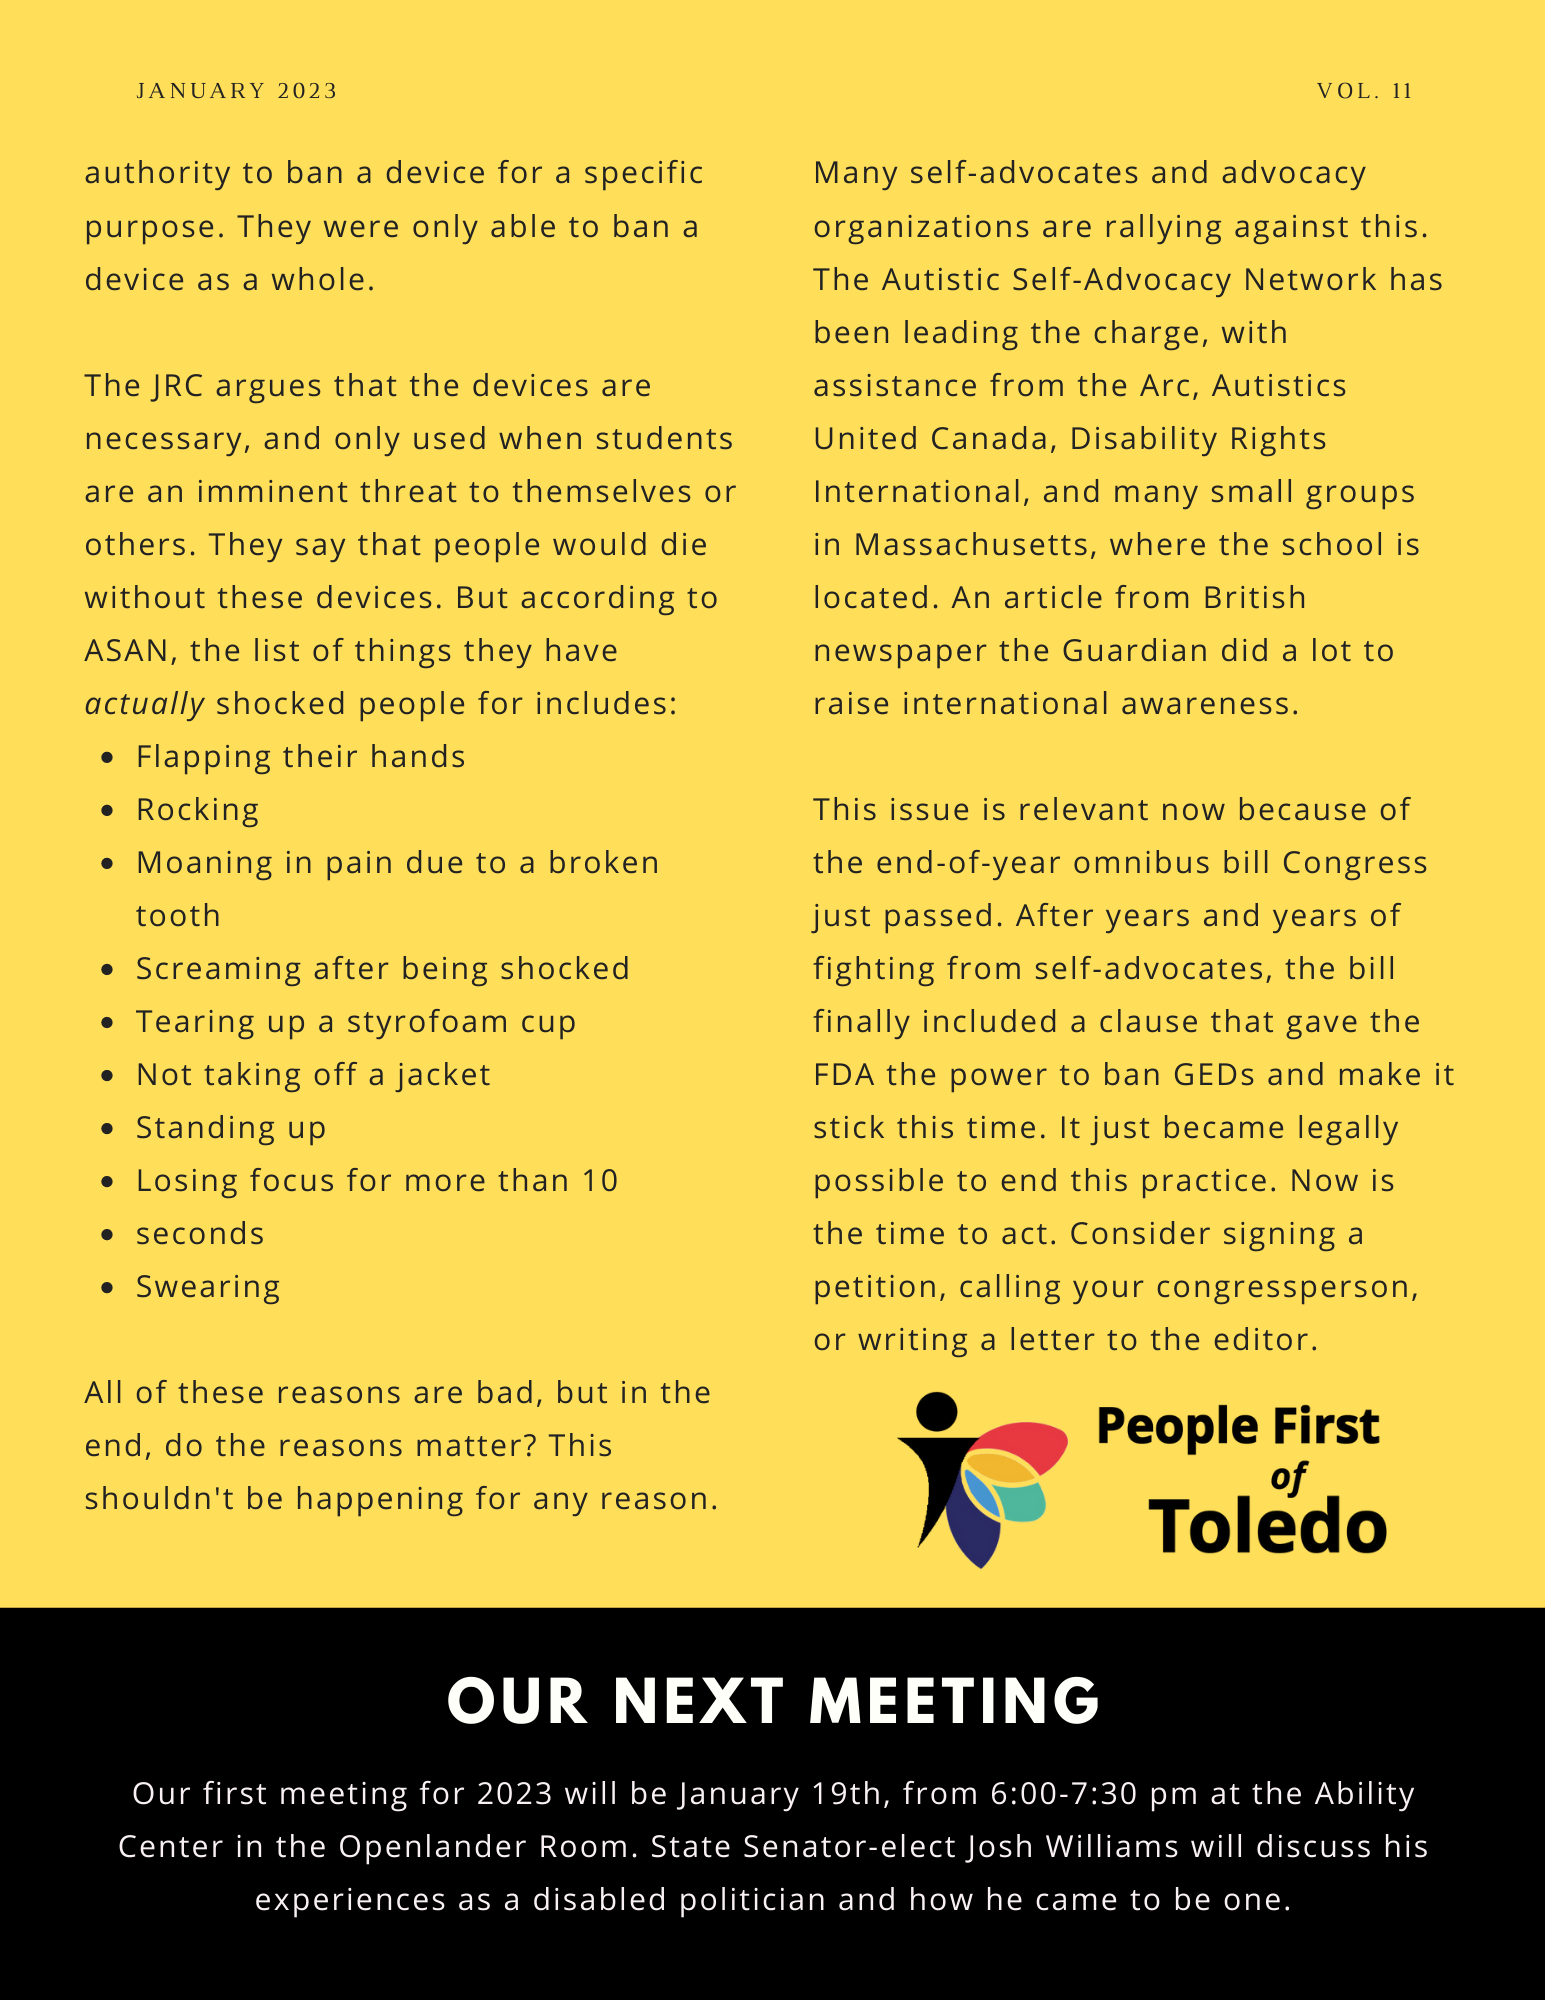 The backside of the January Newsletter. It is yellow with black accents. The People First of Toledo logo is under the right hand column.